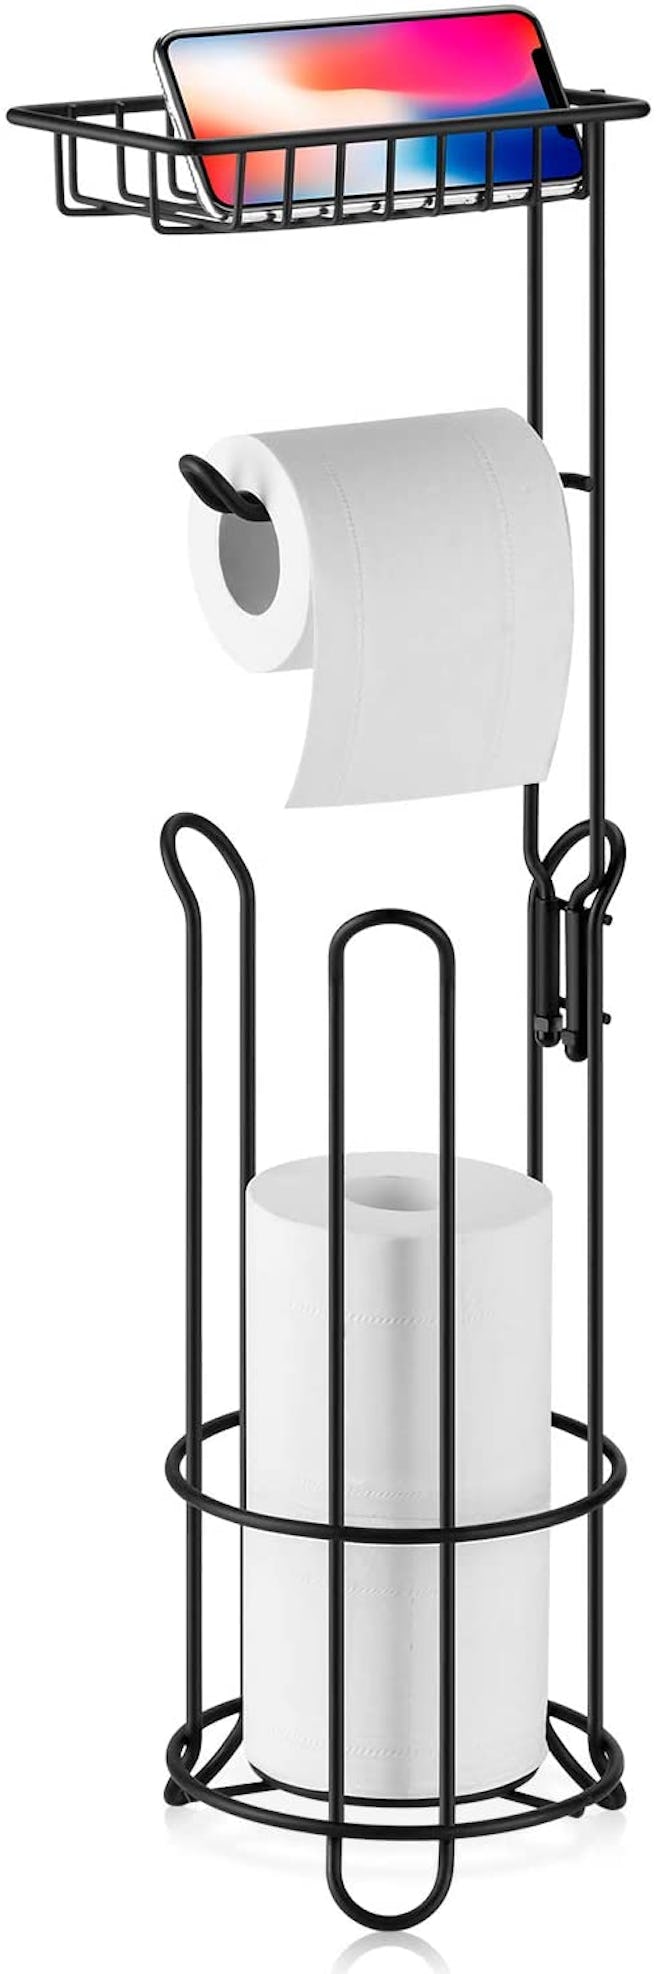 XEEX Toilet Paper Holder Stand